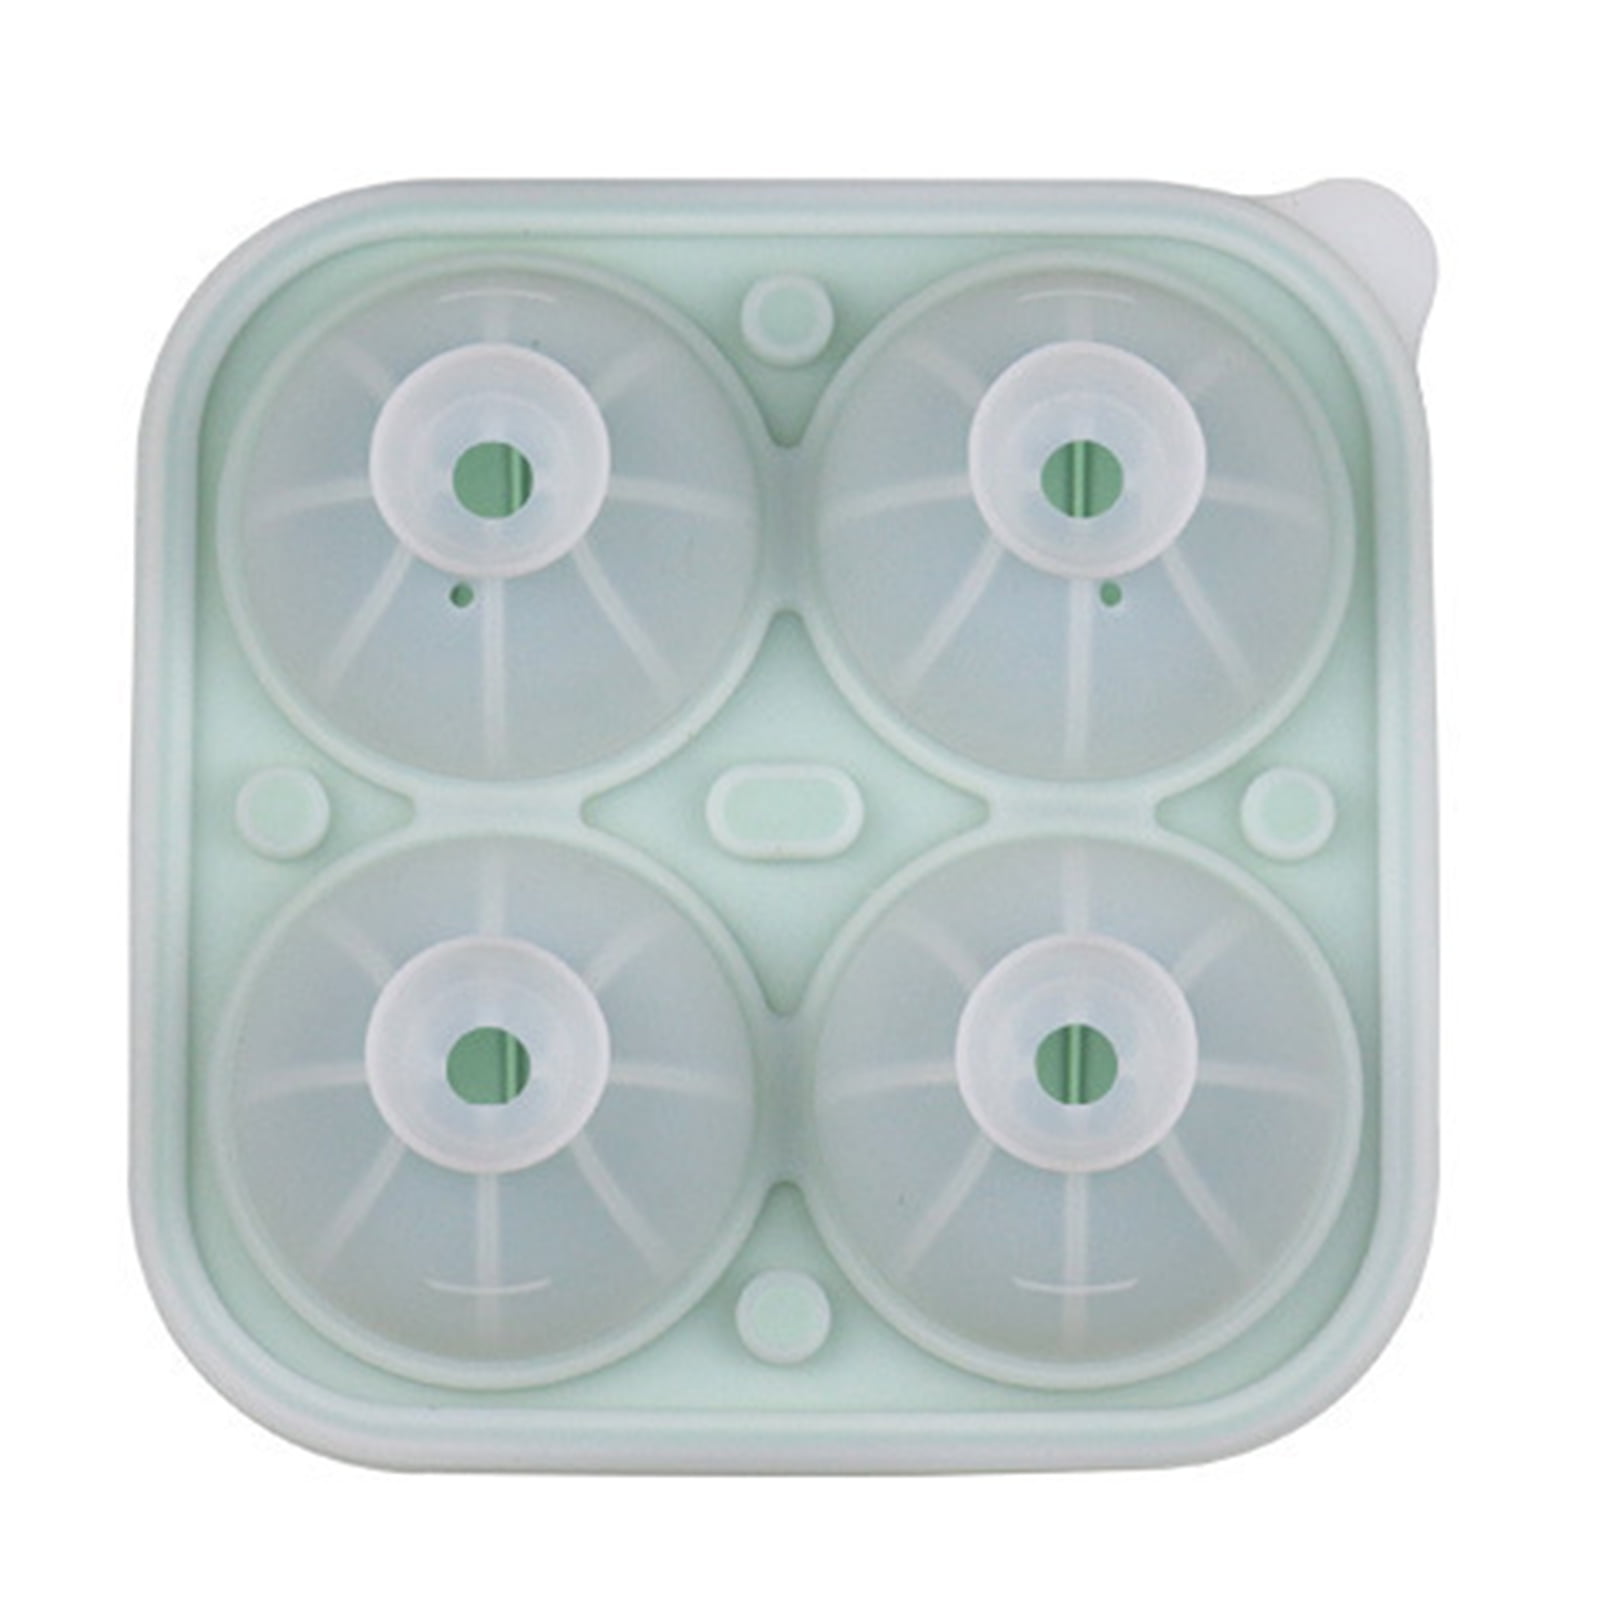 Football Silicone Ice Mold - HR092 - IdeaStage Promotional Products